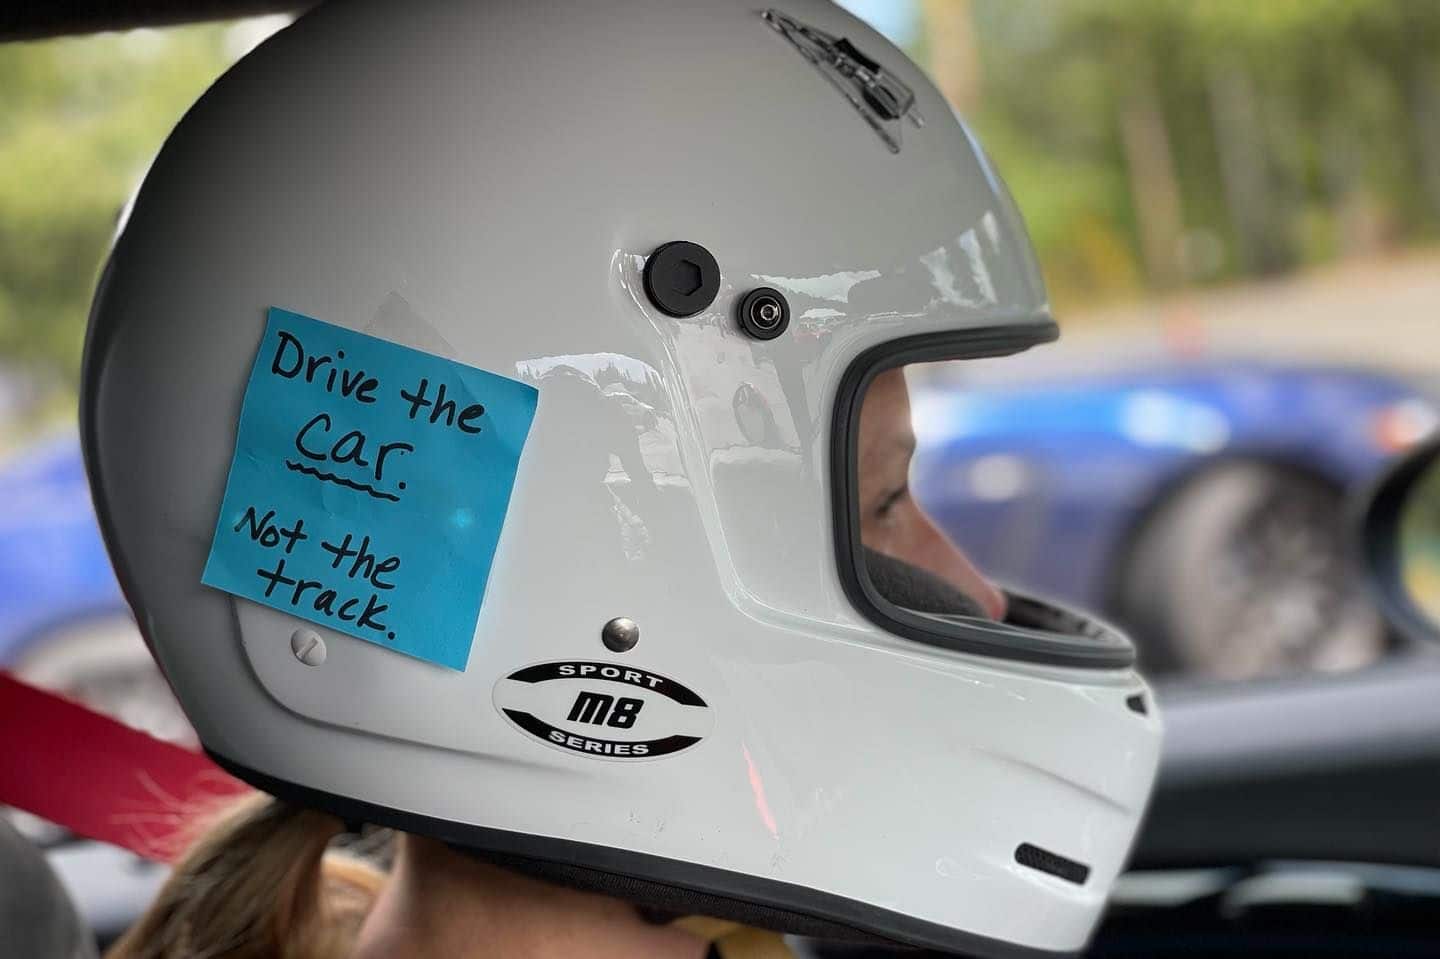 Michele Graaf with post-it-note on helmet: Drive the Car, not the track